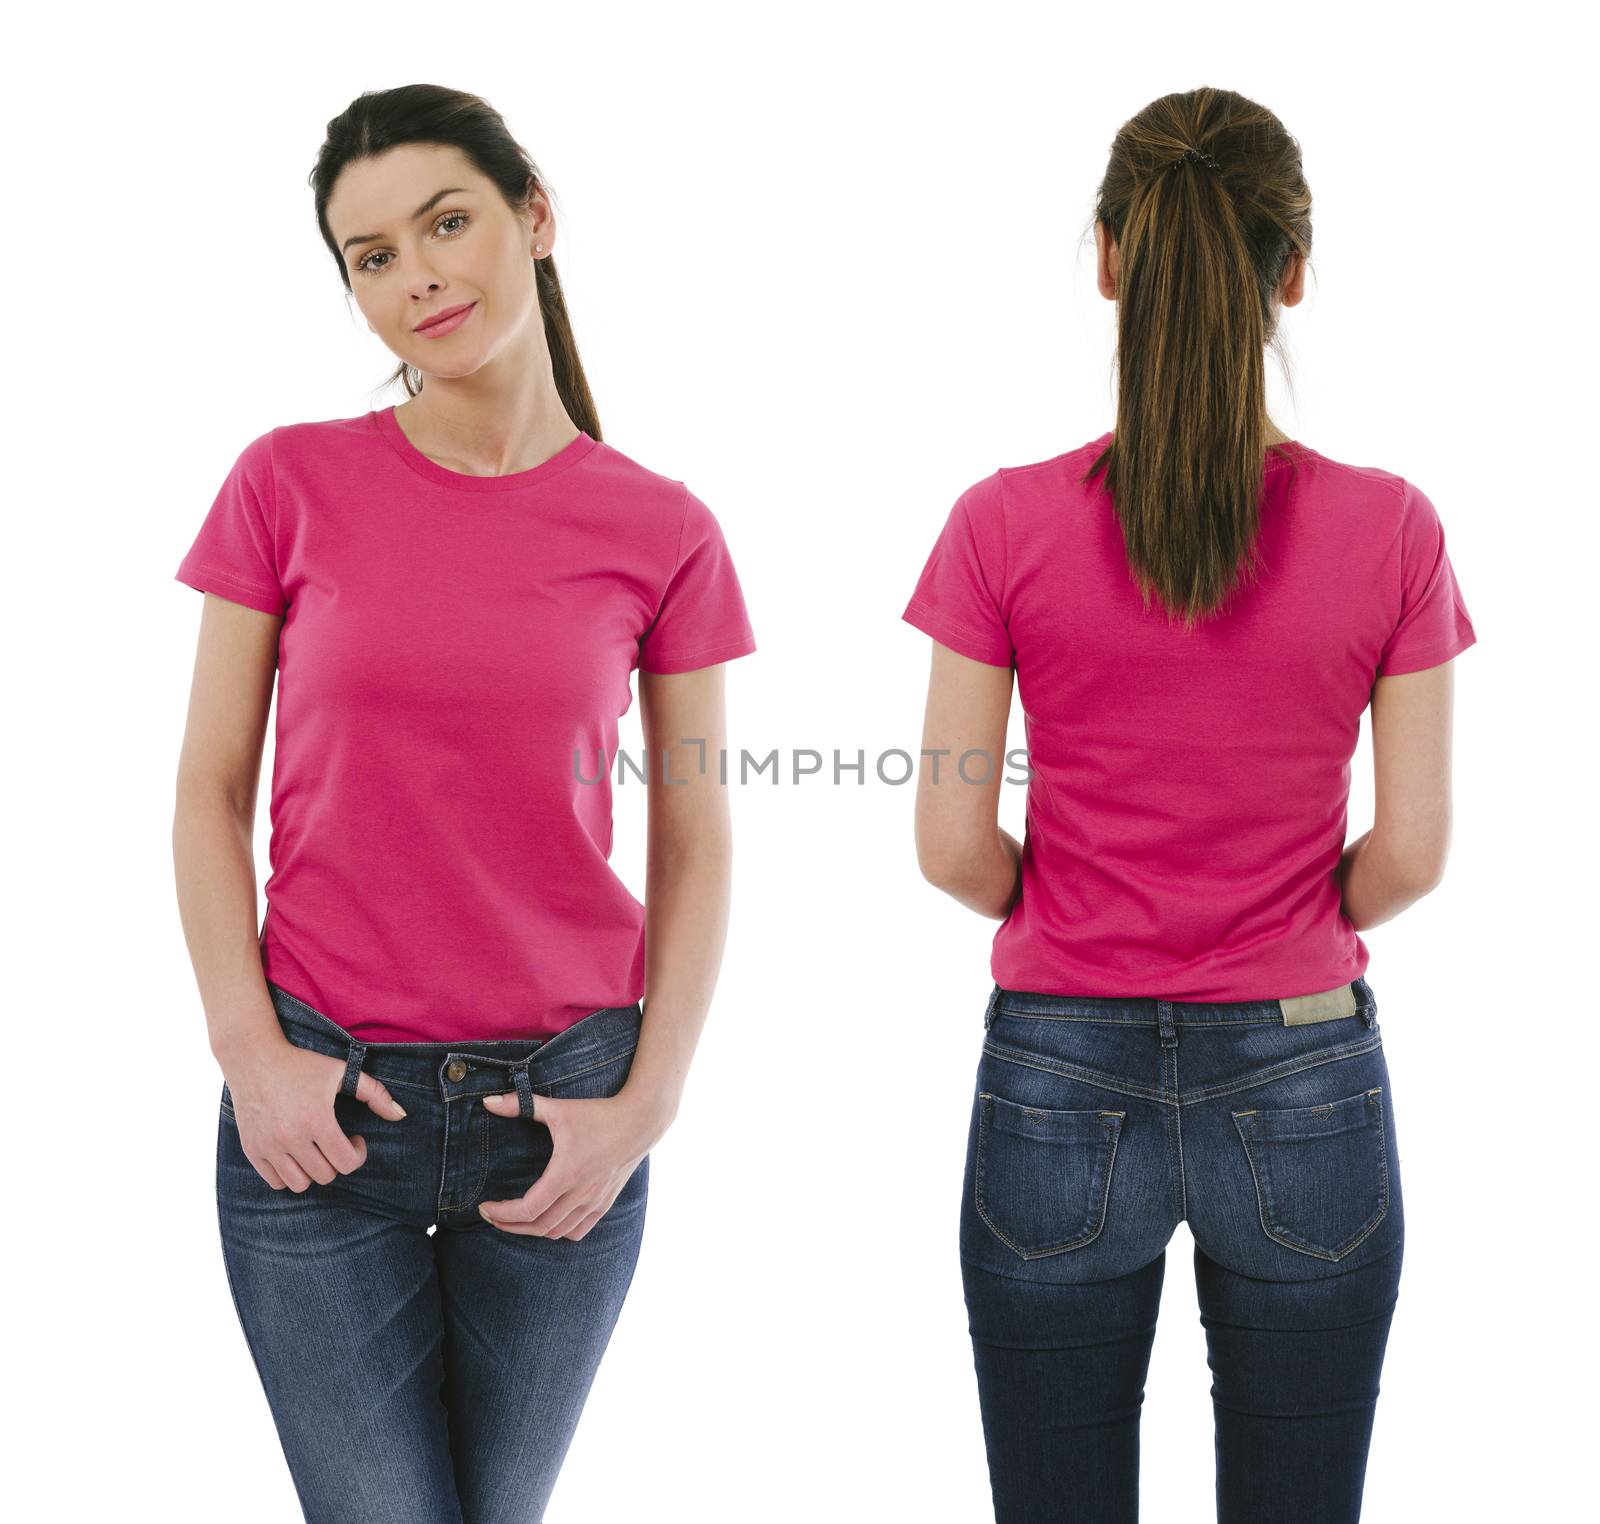 Photo of a beautiful brunette woman posing with a blank pink t-shirt, ready for your artwork or design.